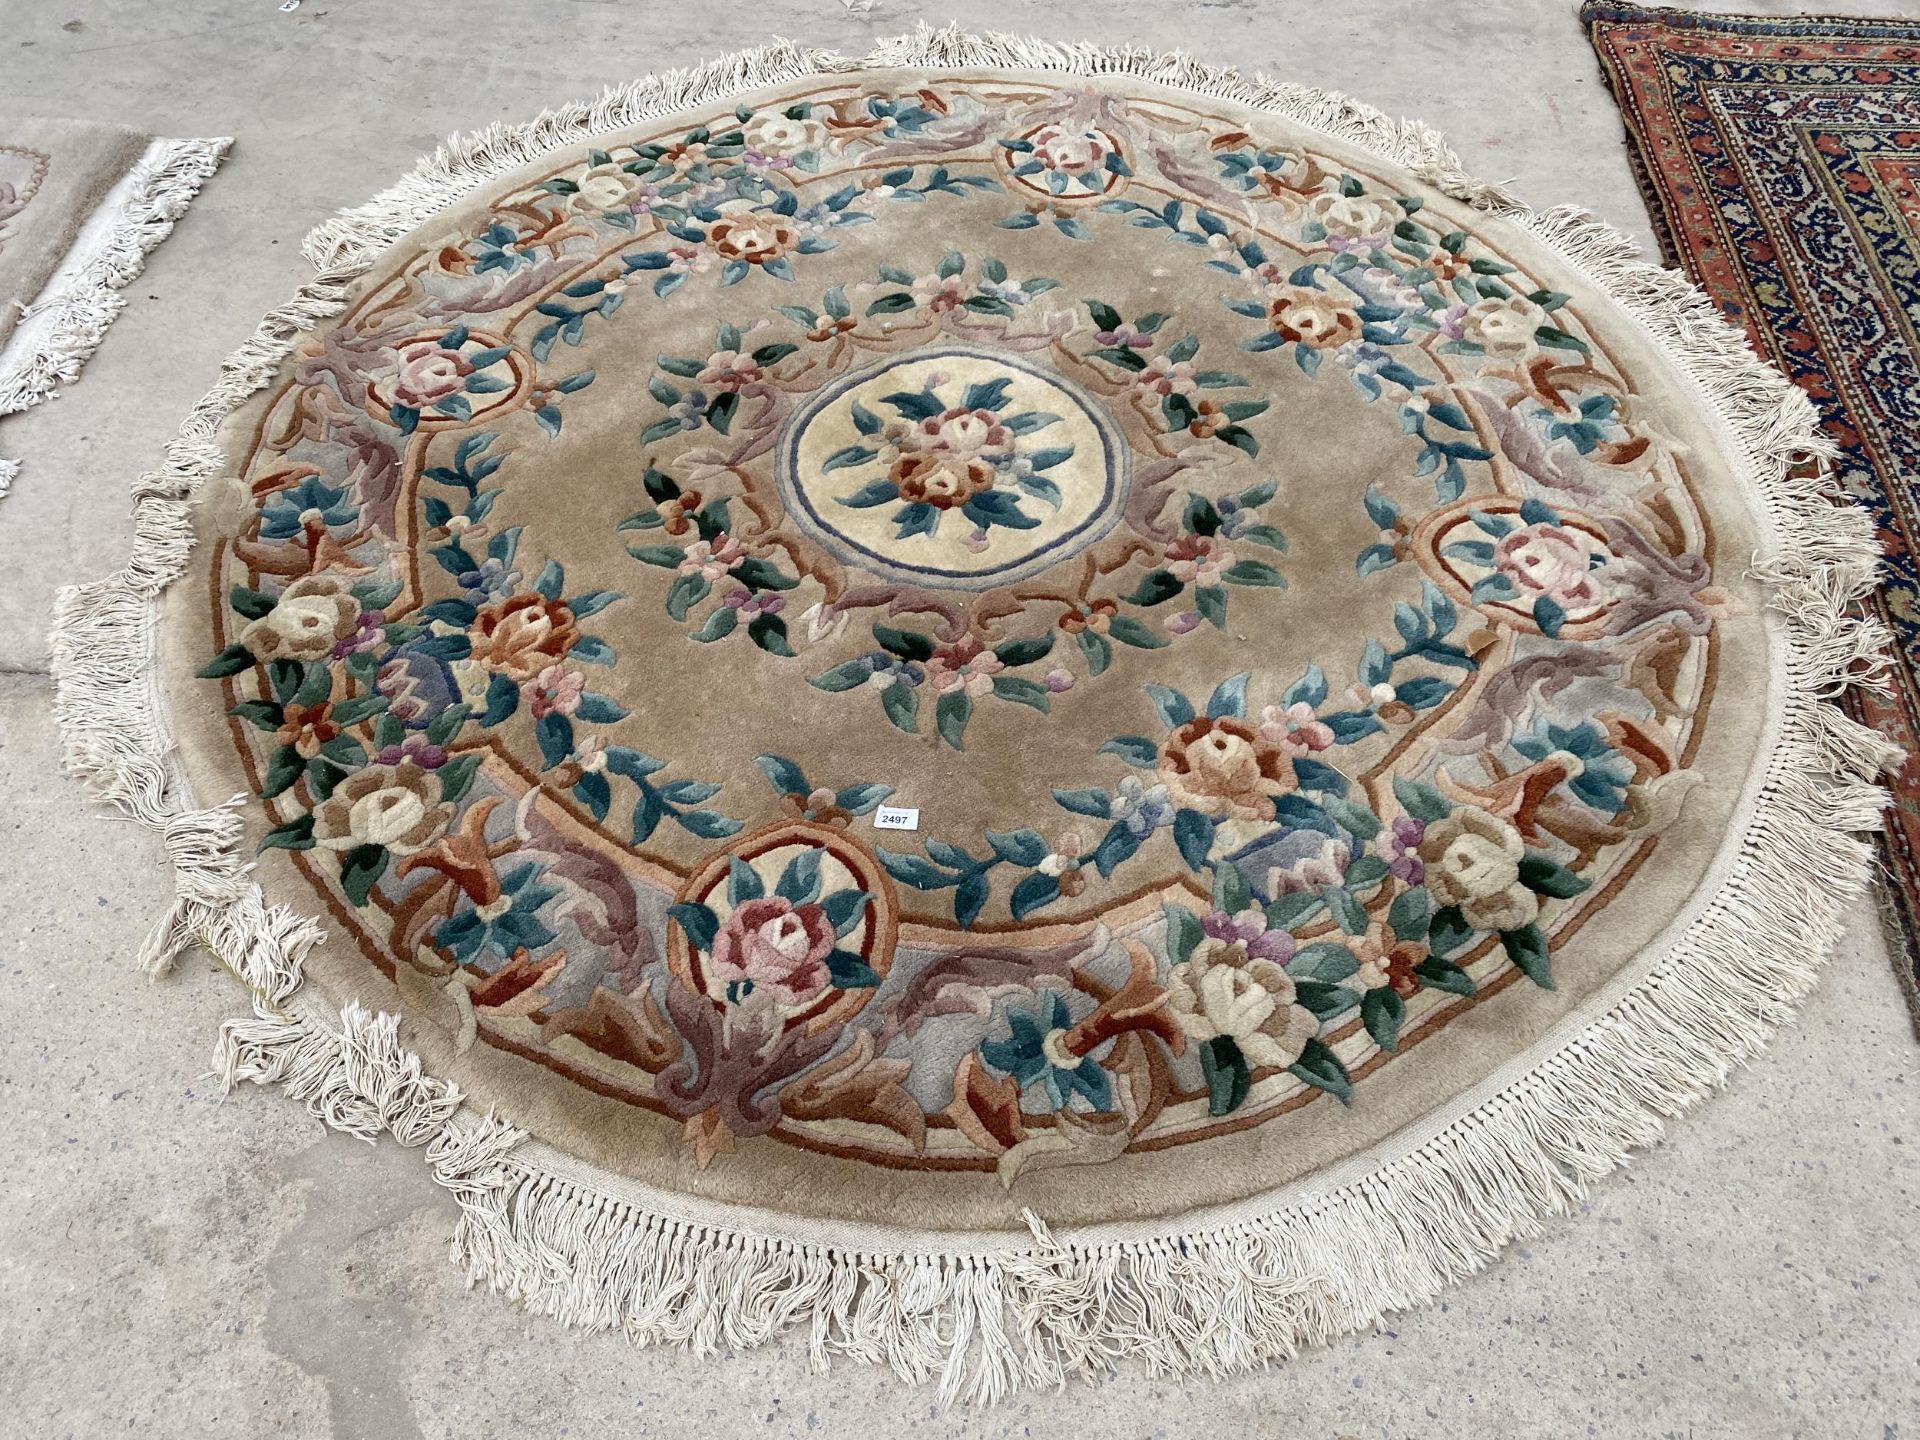 A CIRCULAR PEACH PATTERNED FRINGED RUG